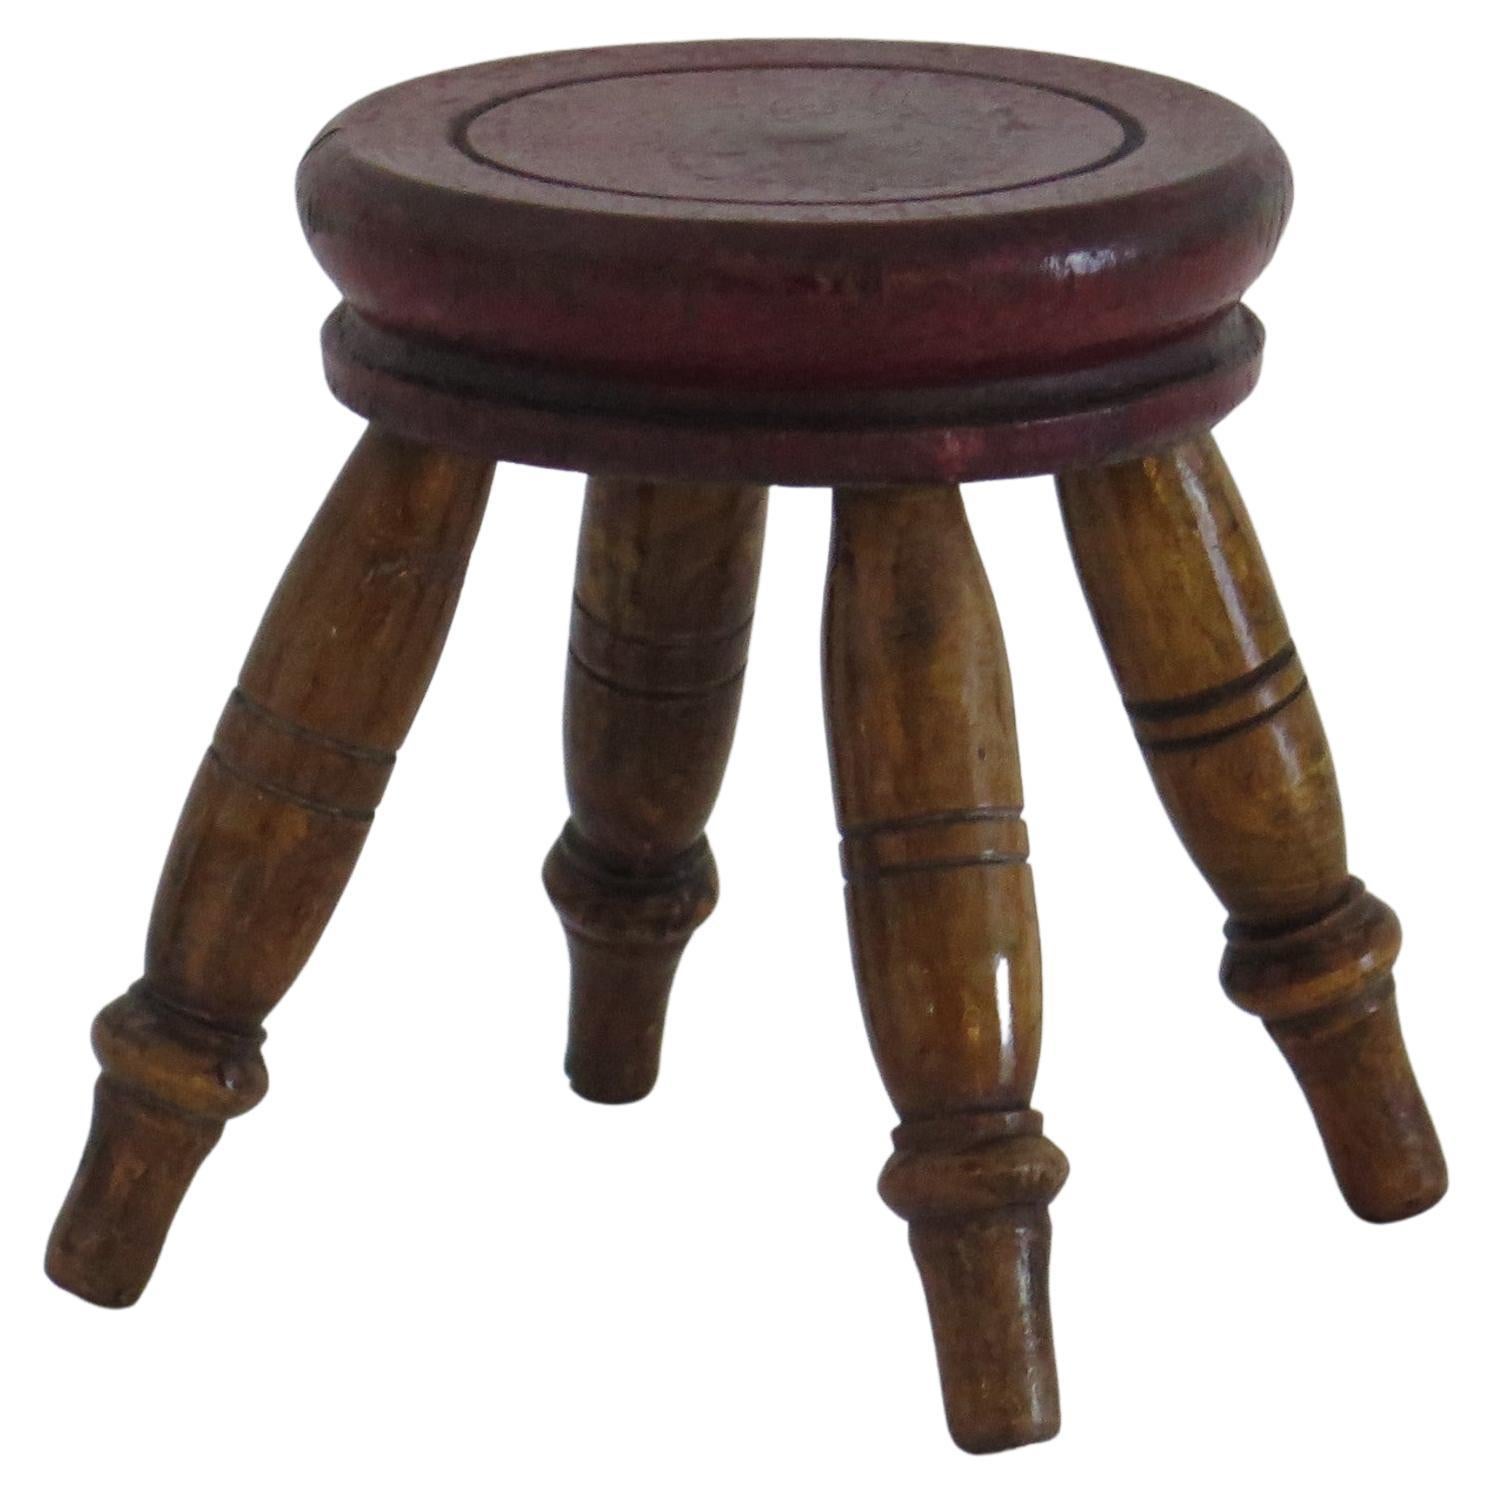 Rare small Candle Stand or Miniature Stool Hand Turned Wood, English circa 1850 For Sale